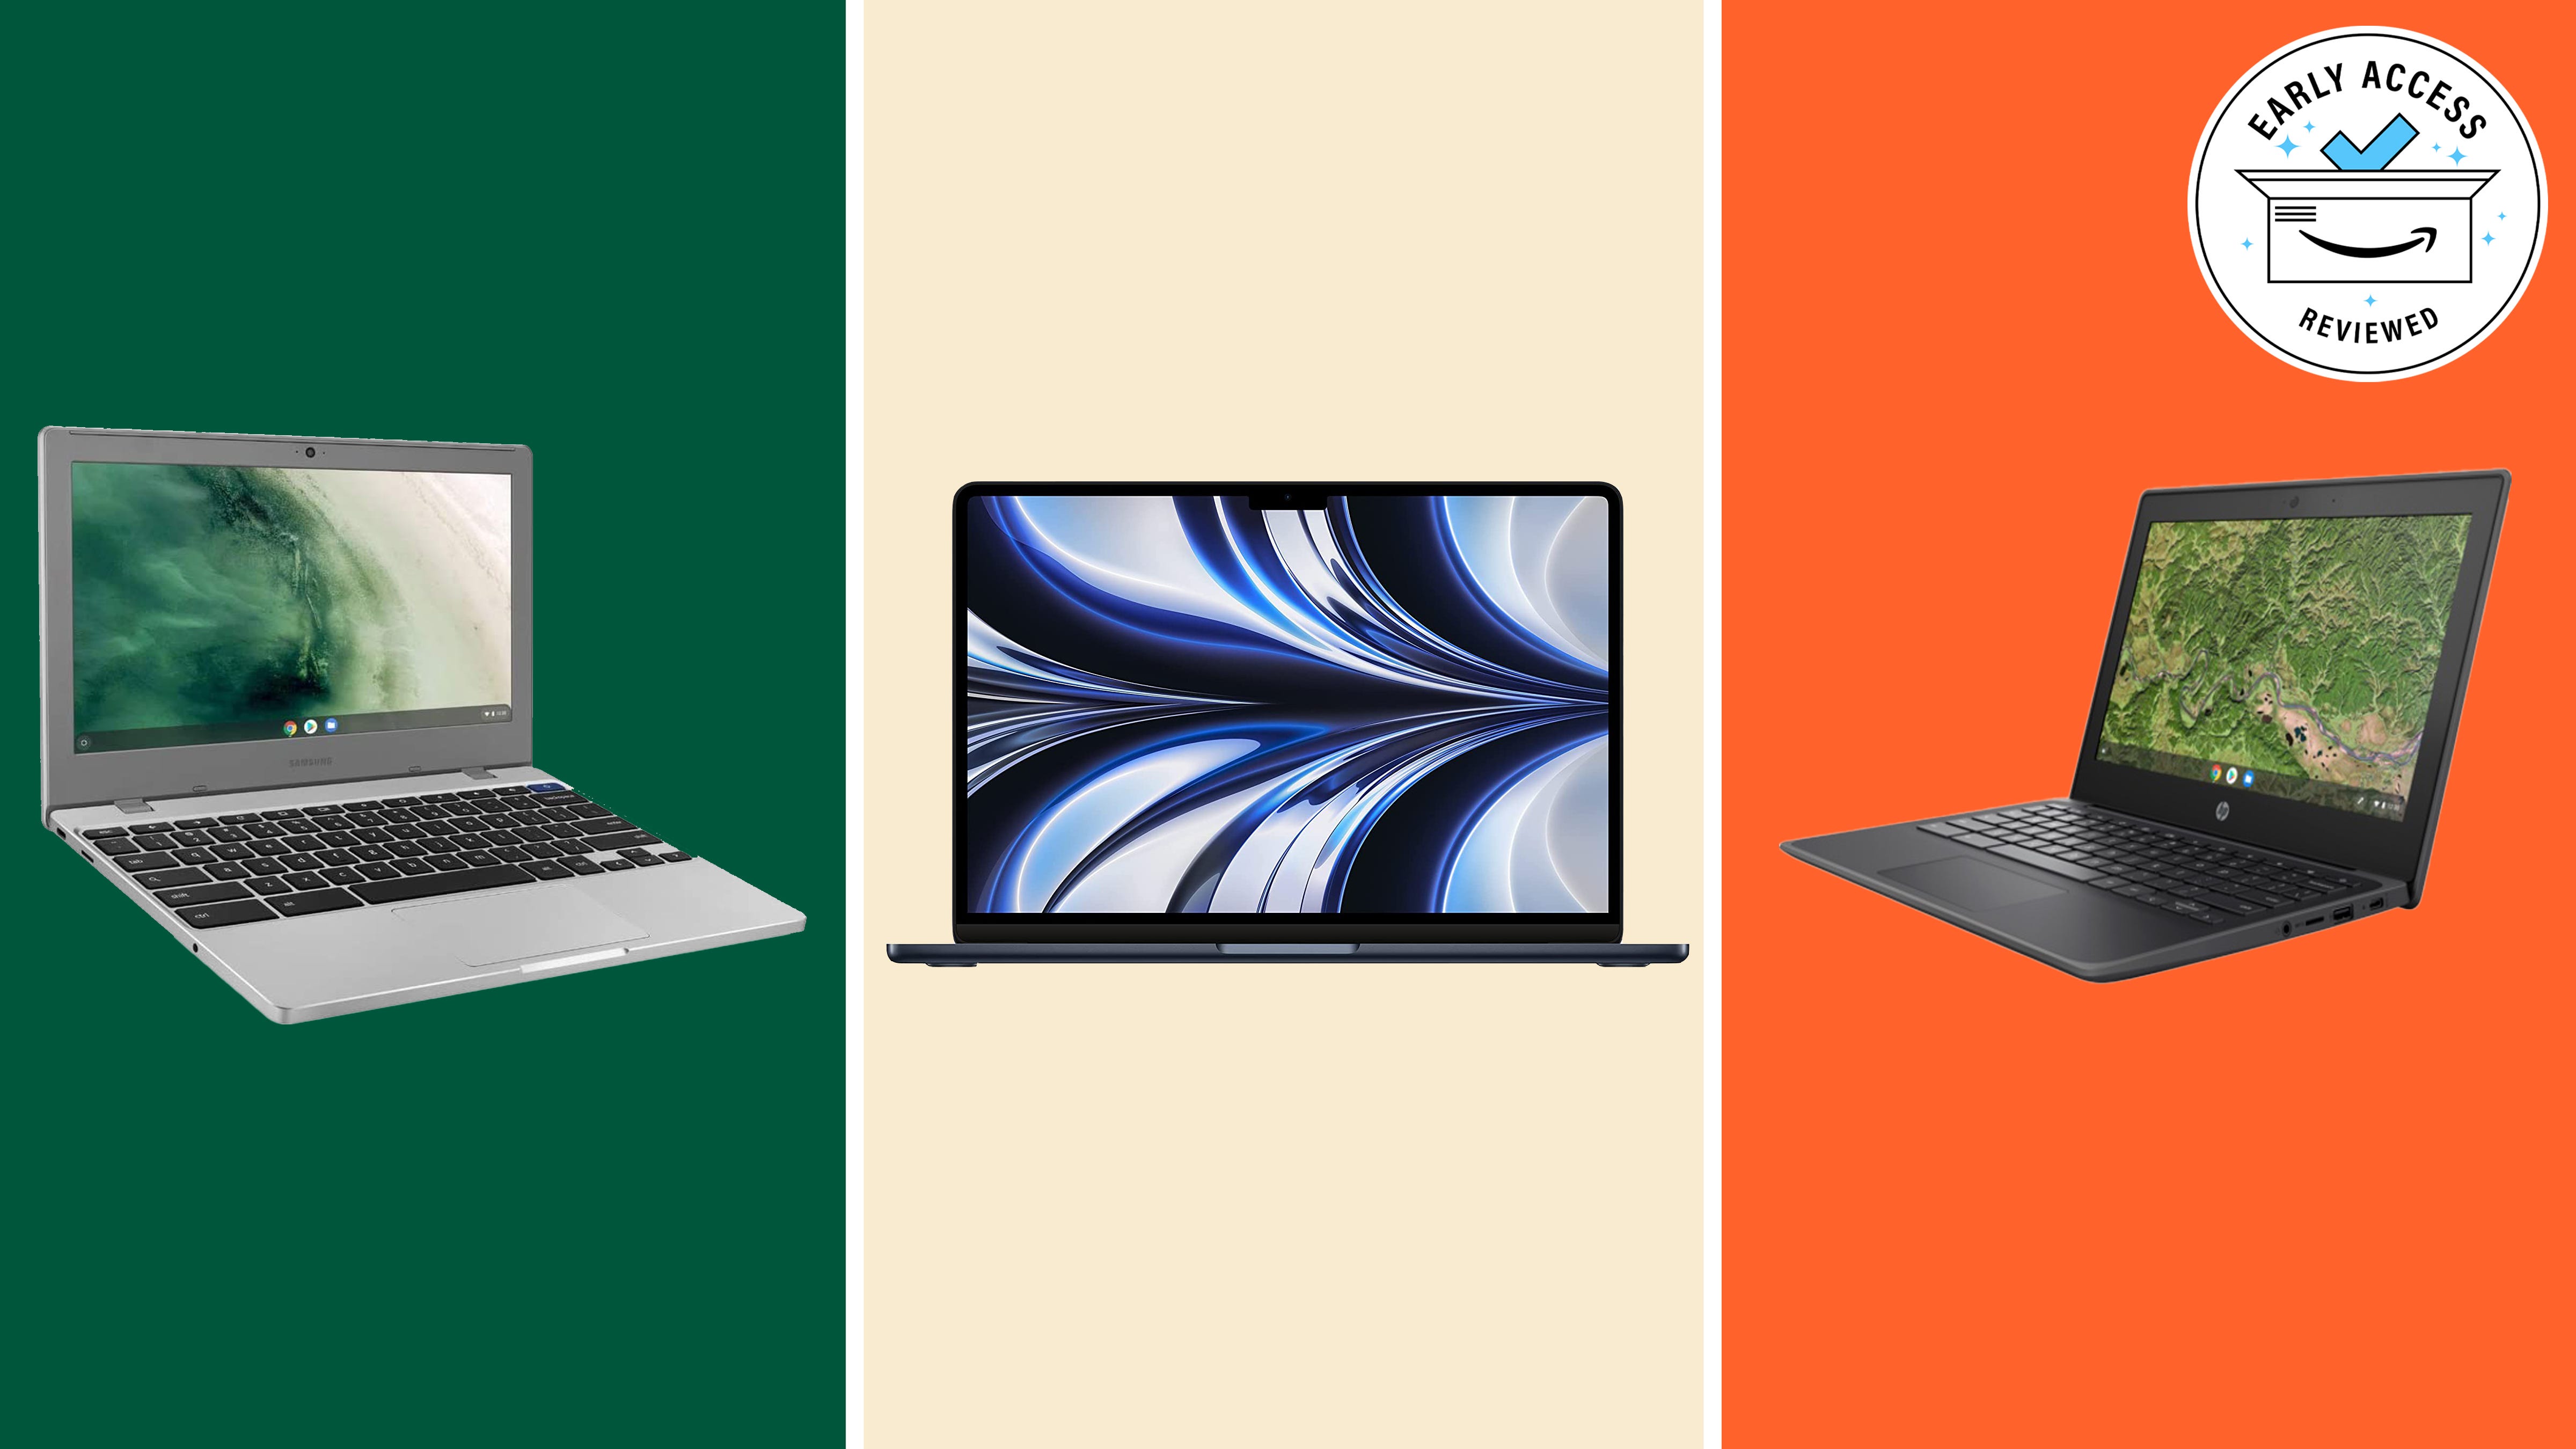 Get an upgrade for Prime Day with laptop deals from Amazon, Walmart and more before Black Friday